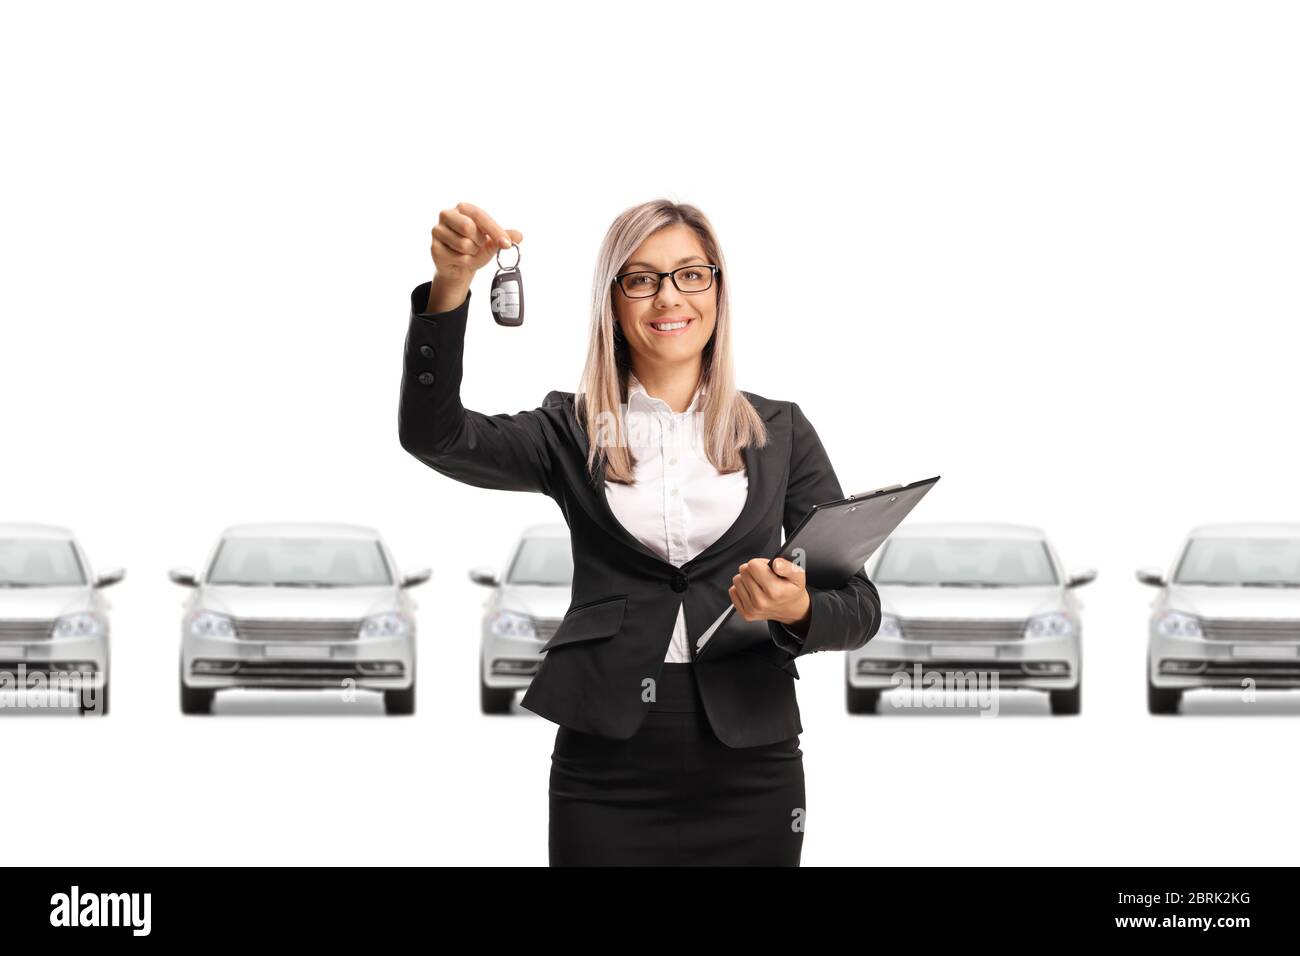 Professional sales woman showing car keys and row of cars behind isolated on white background Stock Photo